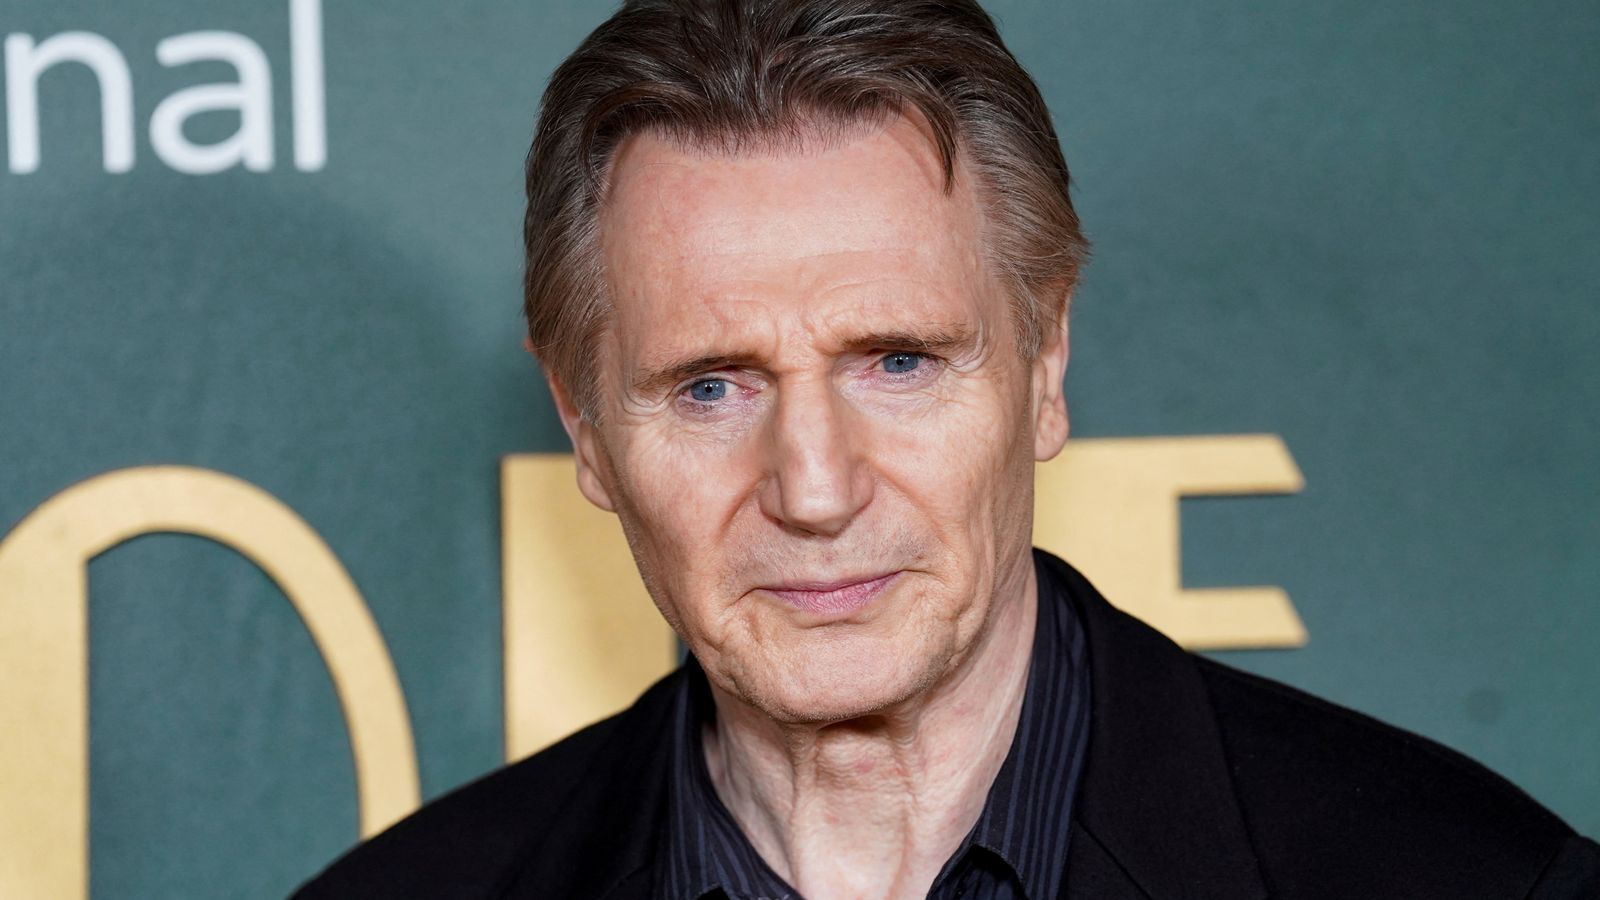 I think it will happen': Liam Neeson says Ireland will be united during his  lifetime | World News | Sky News